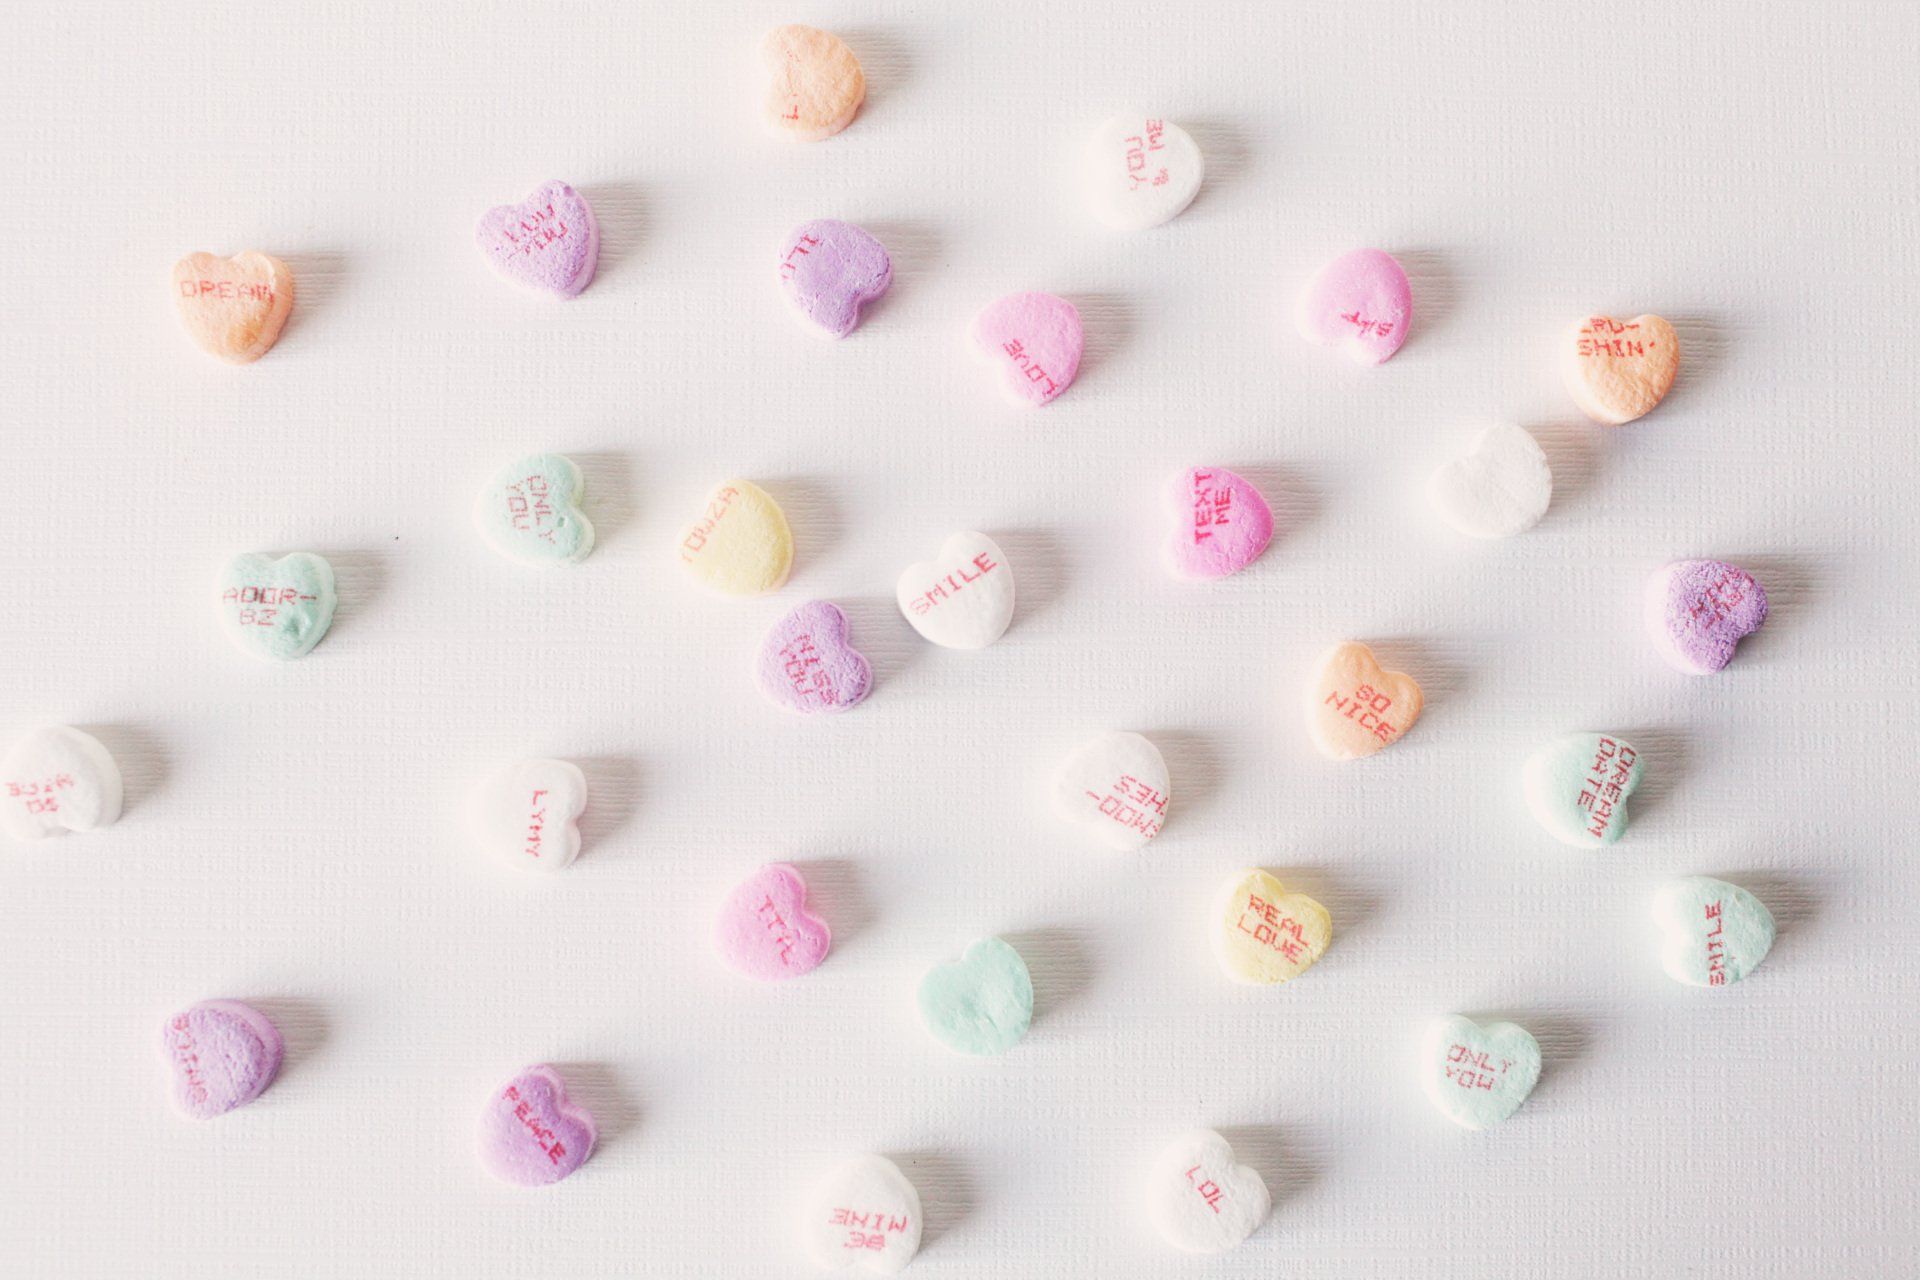 Multicolored heart-shaped Valentine's Day candies spread out on a white table